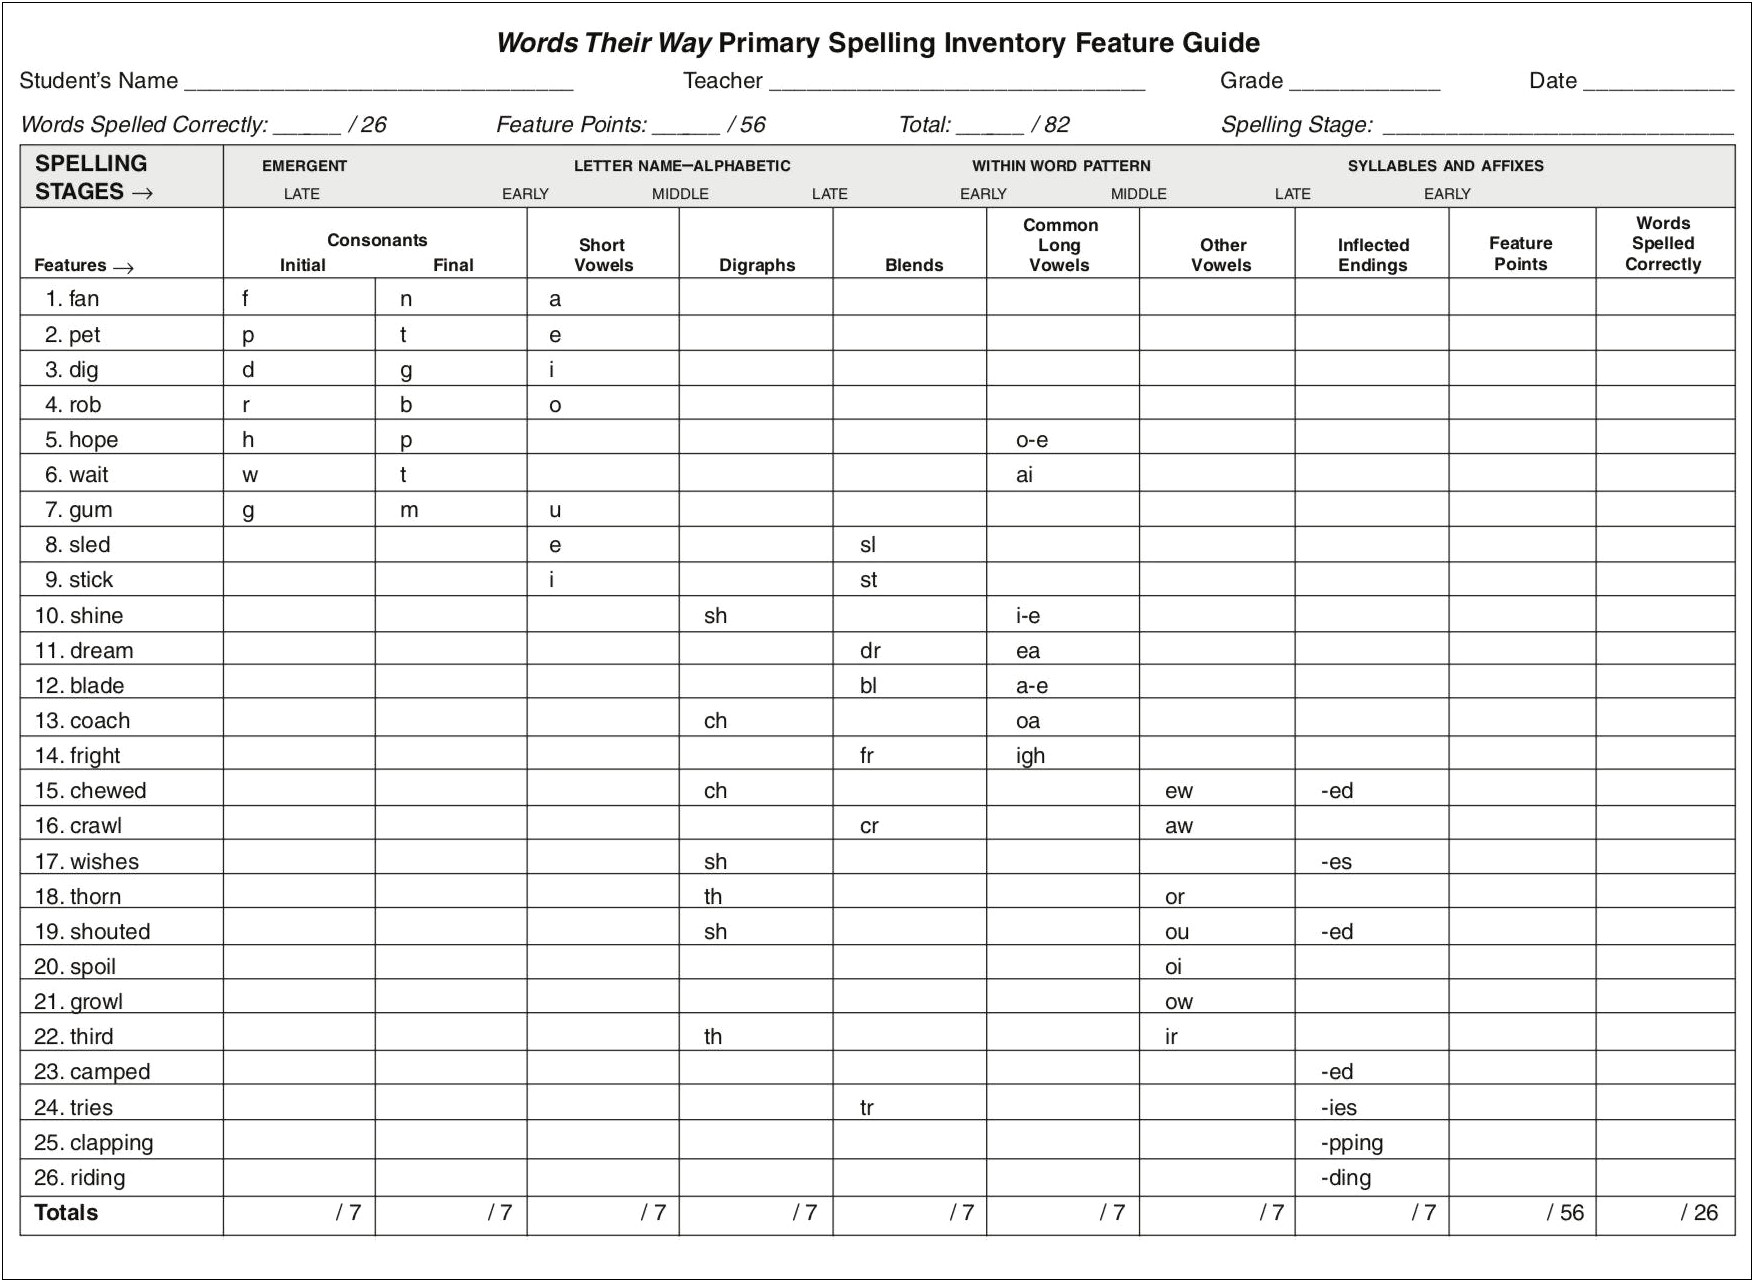 Words Their Way Primary Spelling Inventory Template